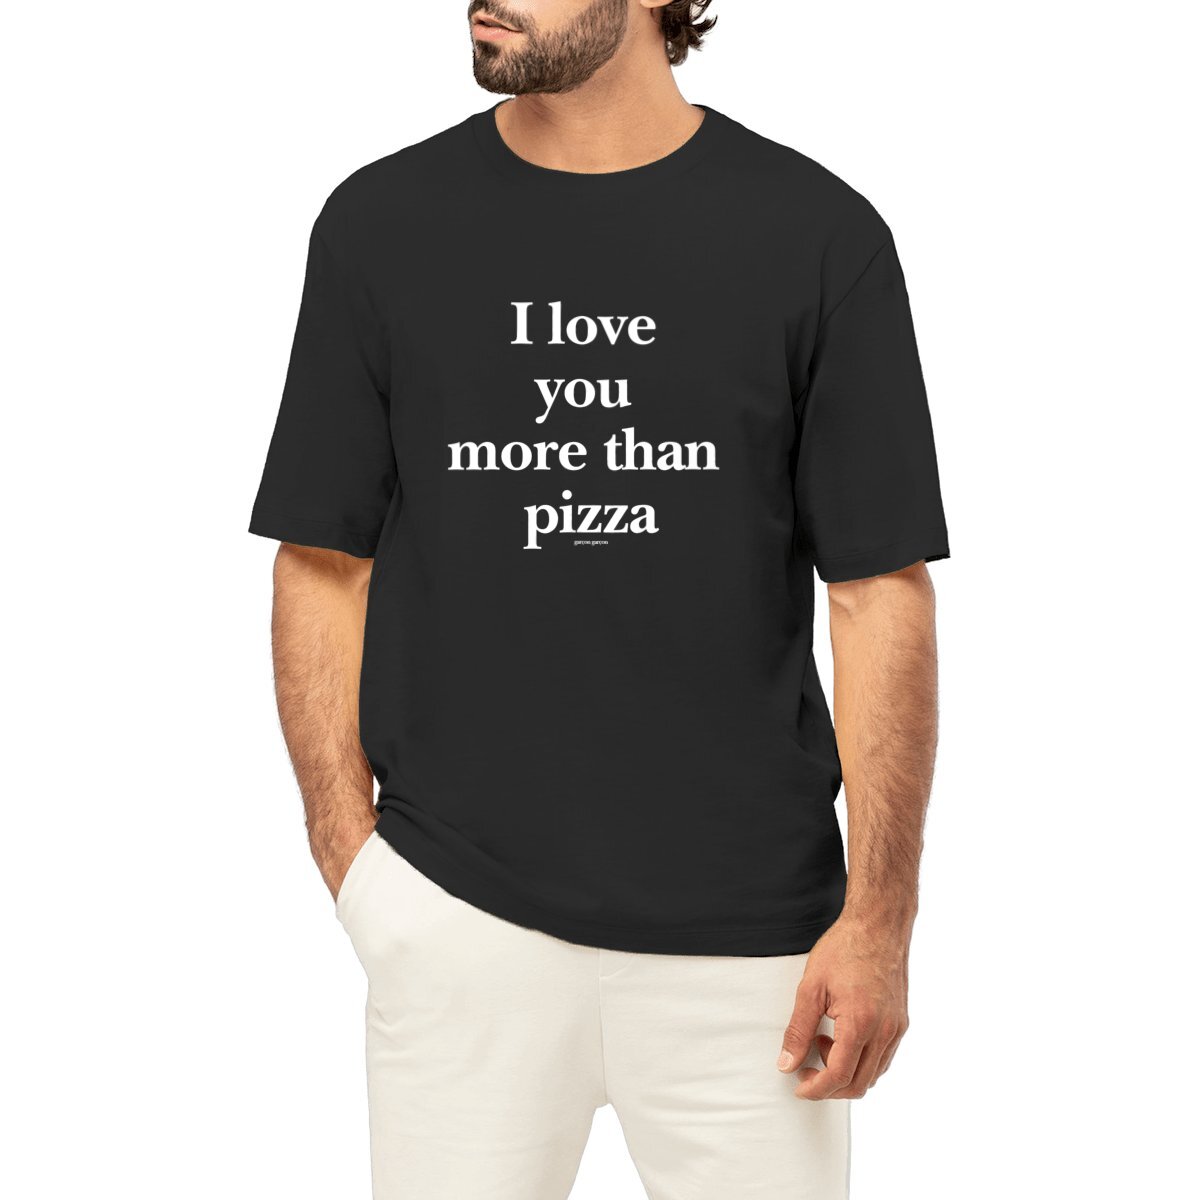 i love you more than pizza tee oversized. garçon garçon tee oversize BLACK. Dive into the essence of Parisian cool with this oversized tee. The subtle 'garçon garçon' signature whispers a chic narrative, offering a slice of the city's famed elegance. Perfect for those who speak style with simplicity.